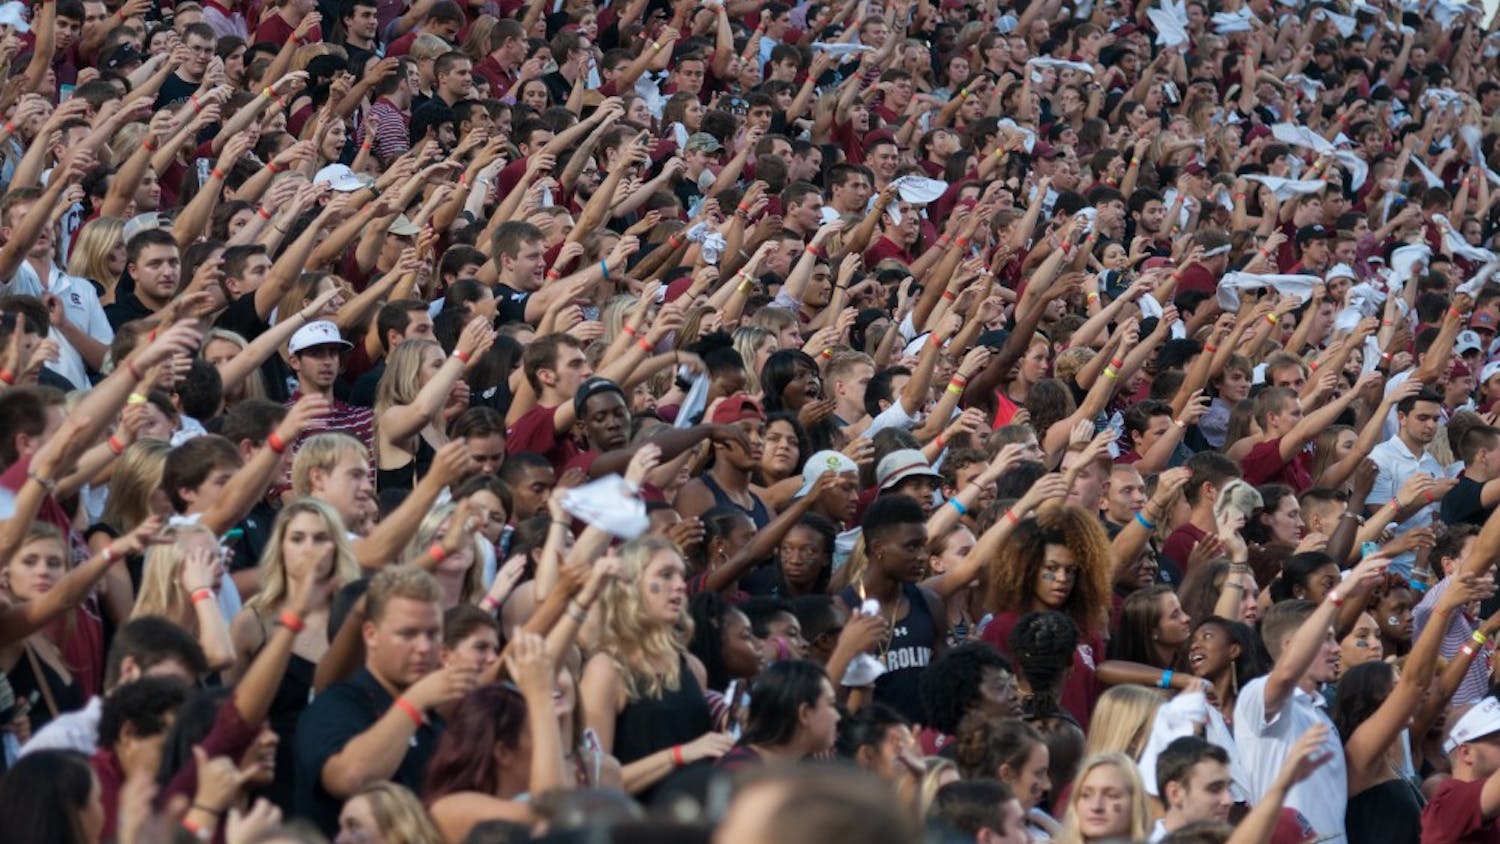 South Carolina&nbsp;fans embrace gameday traditions, such as toasting during the alma mater at the conclusion of games.&nbsp;&nbsp;